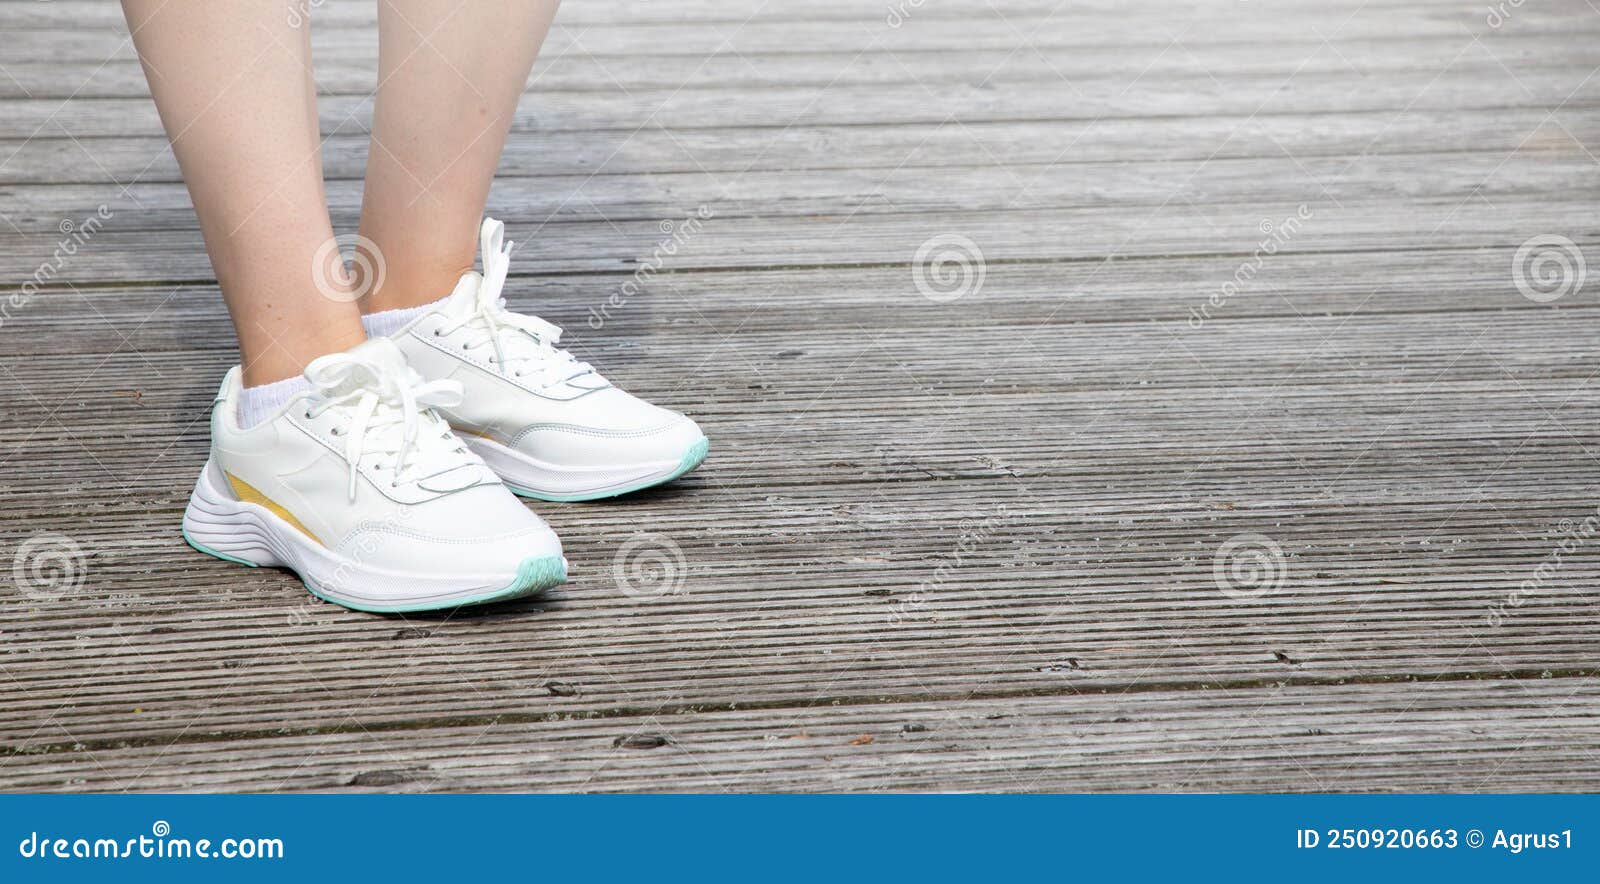 Woman Legs with Sport Shoe on the Road Stock Image - Image of foot ...